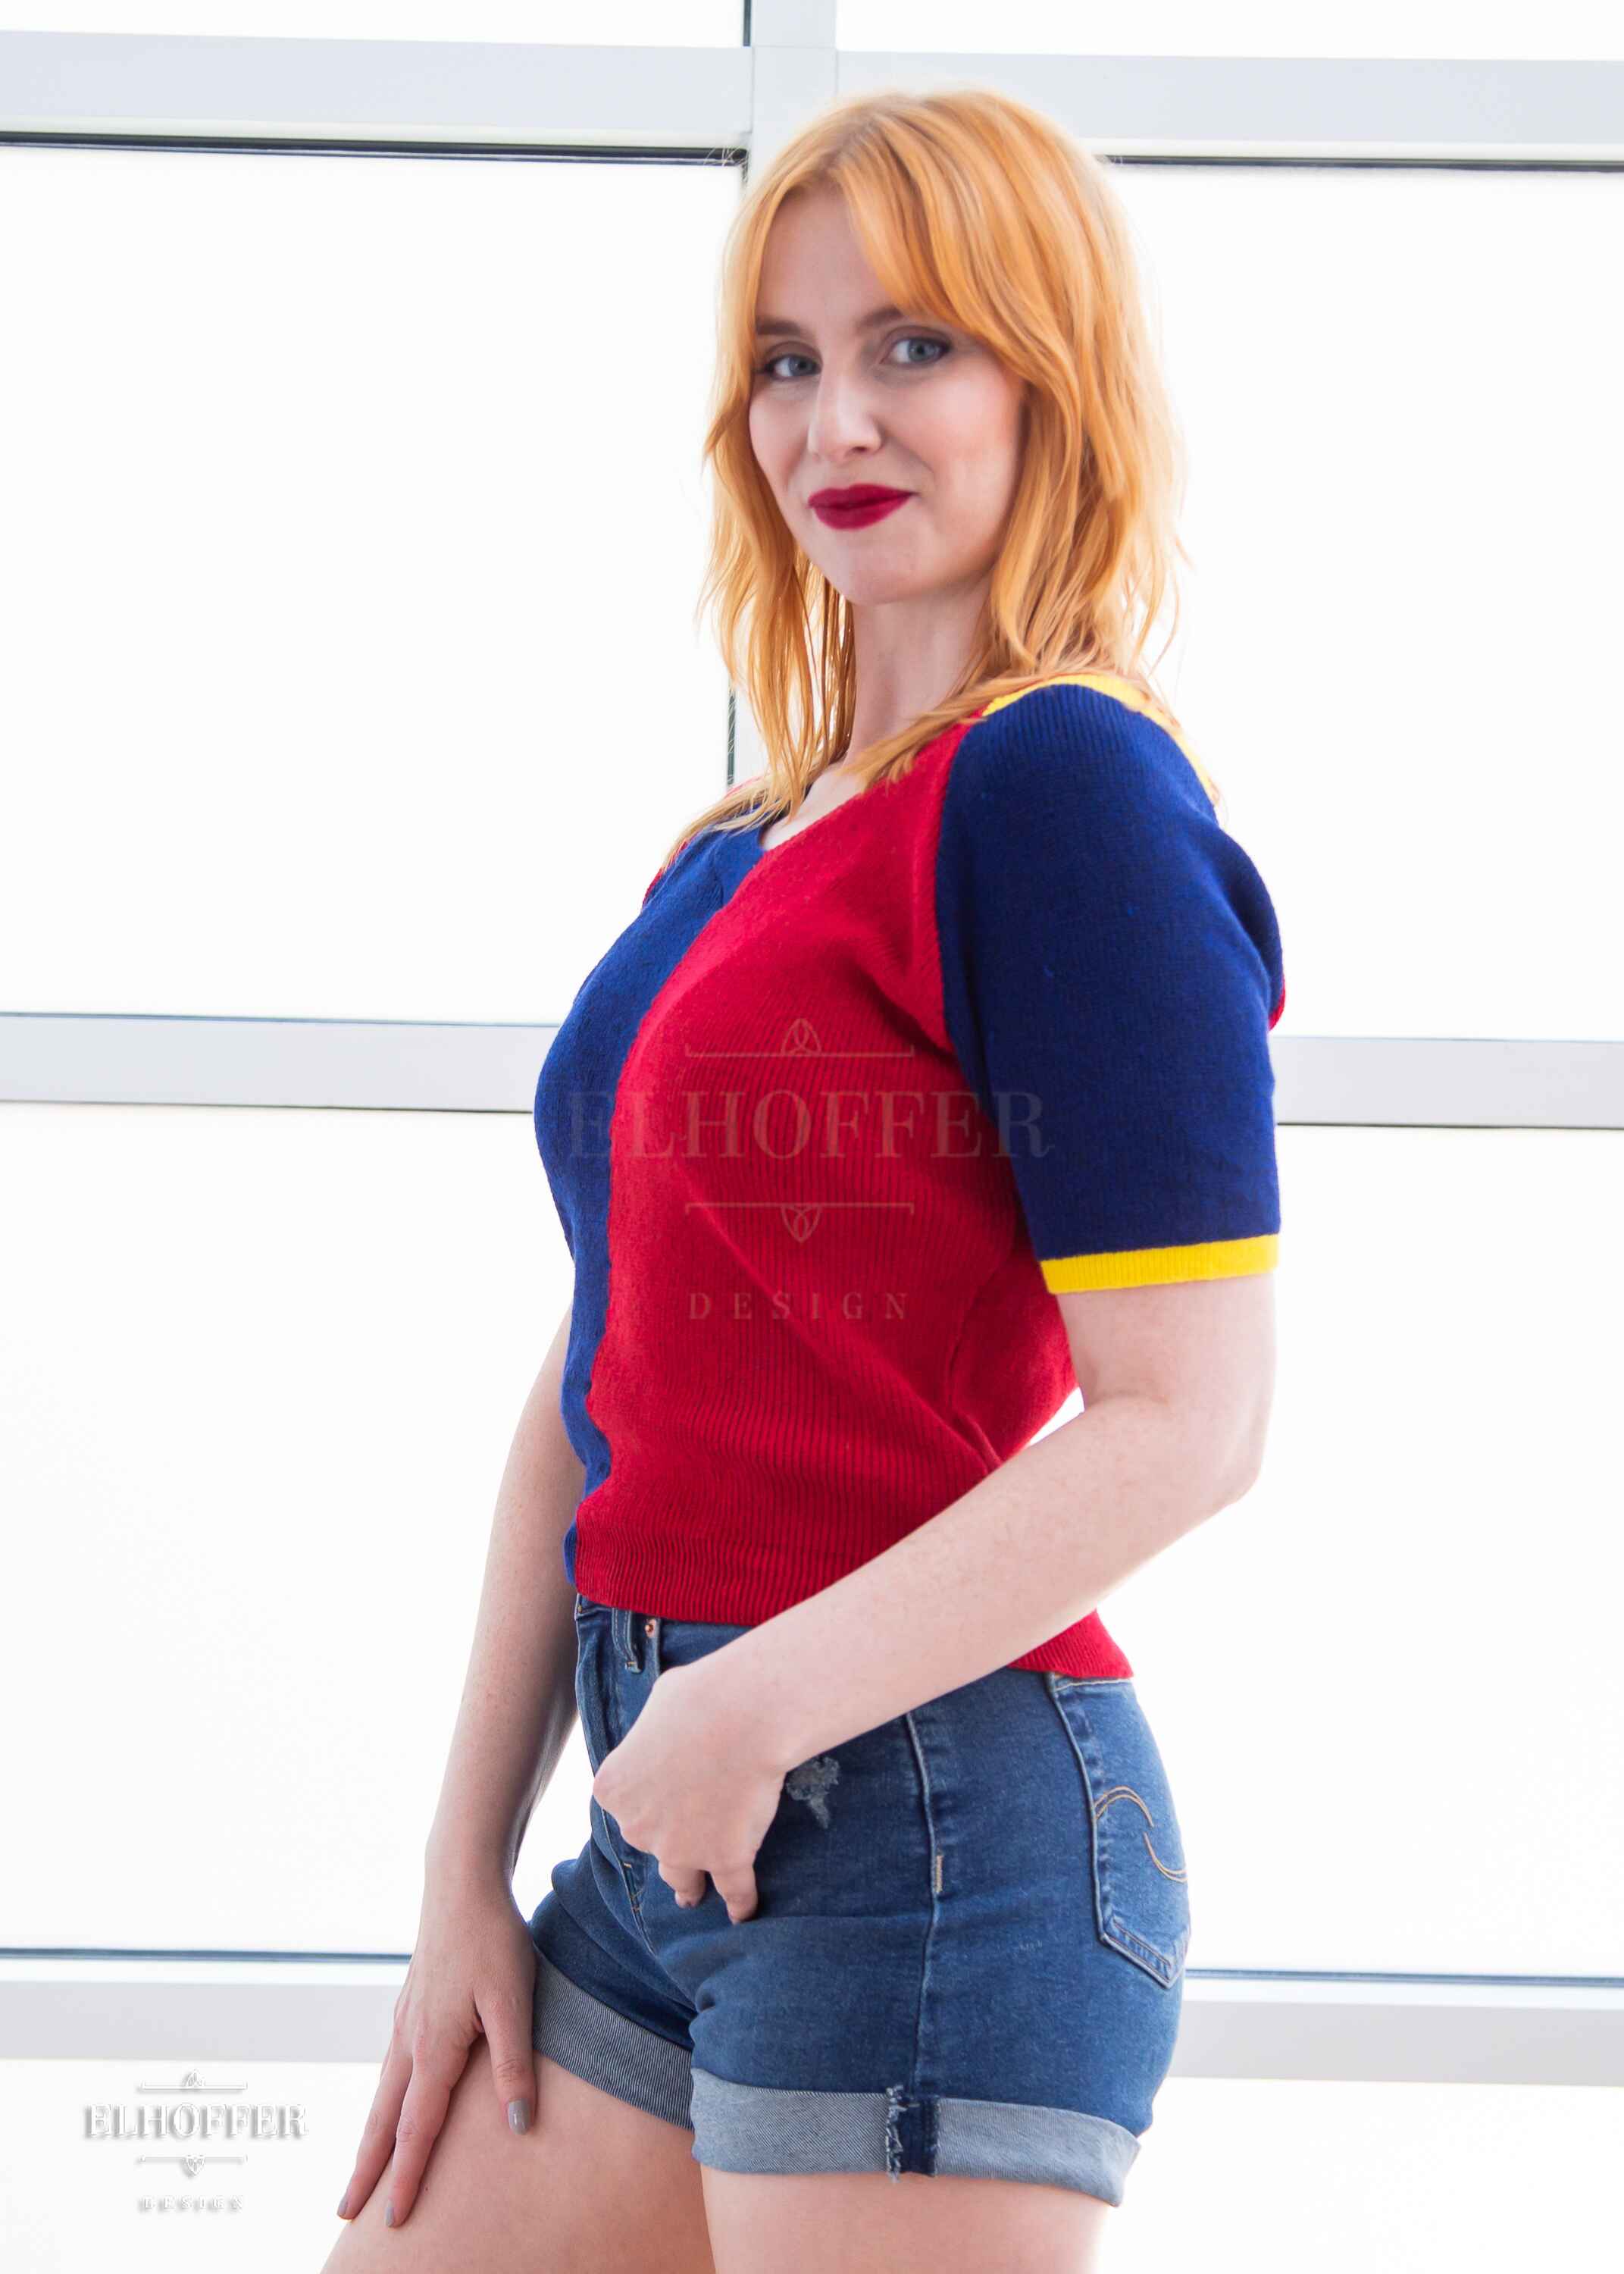 A side view of Harley, a fair skinned S model with shoulder length strawberry blonde hair, wearing a short sleeve knit top with alternating blue and red colors. There is yellow detailing along the top of the shoulder and around the cuff of the sleeve.